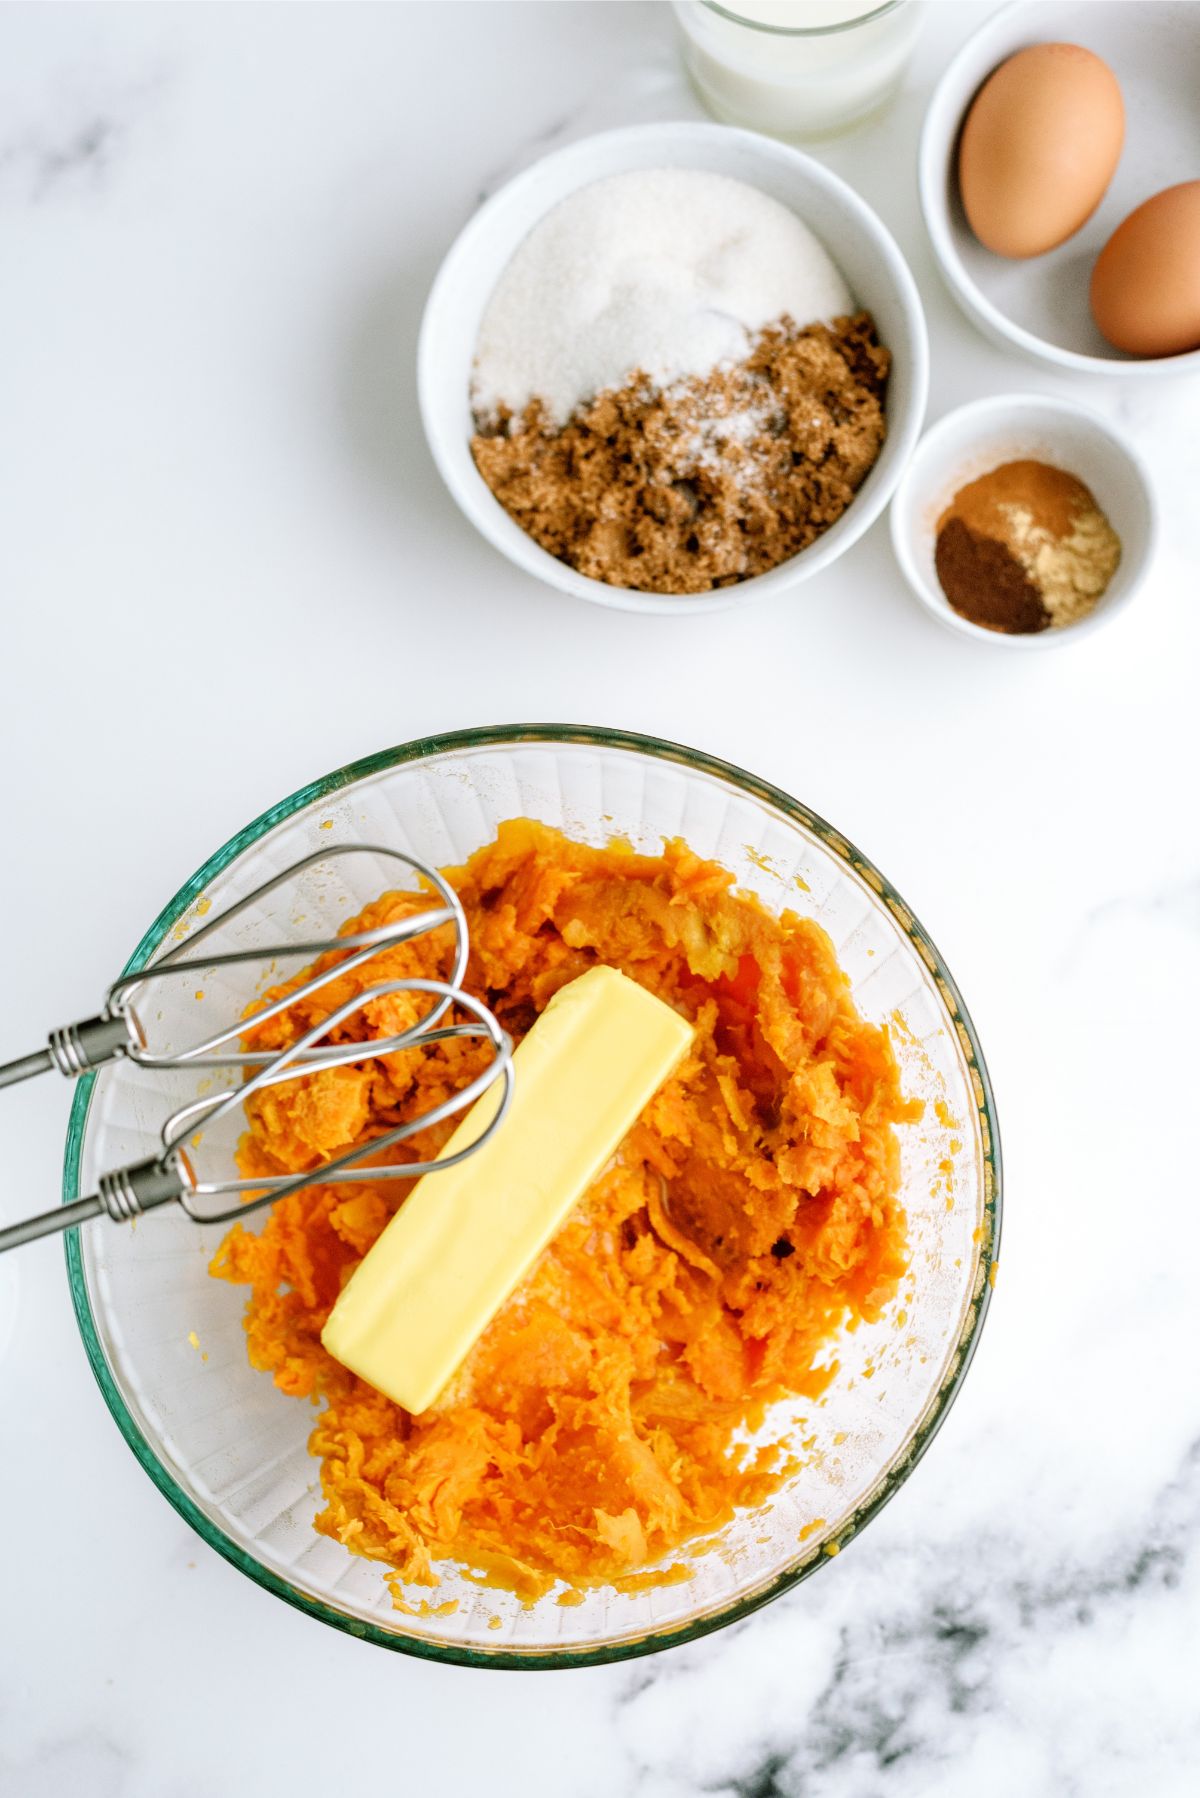 Mashed sweet potatoes in a mixing bowl with butter and a hand mixer